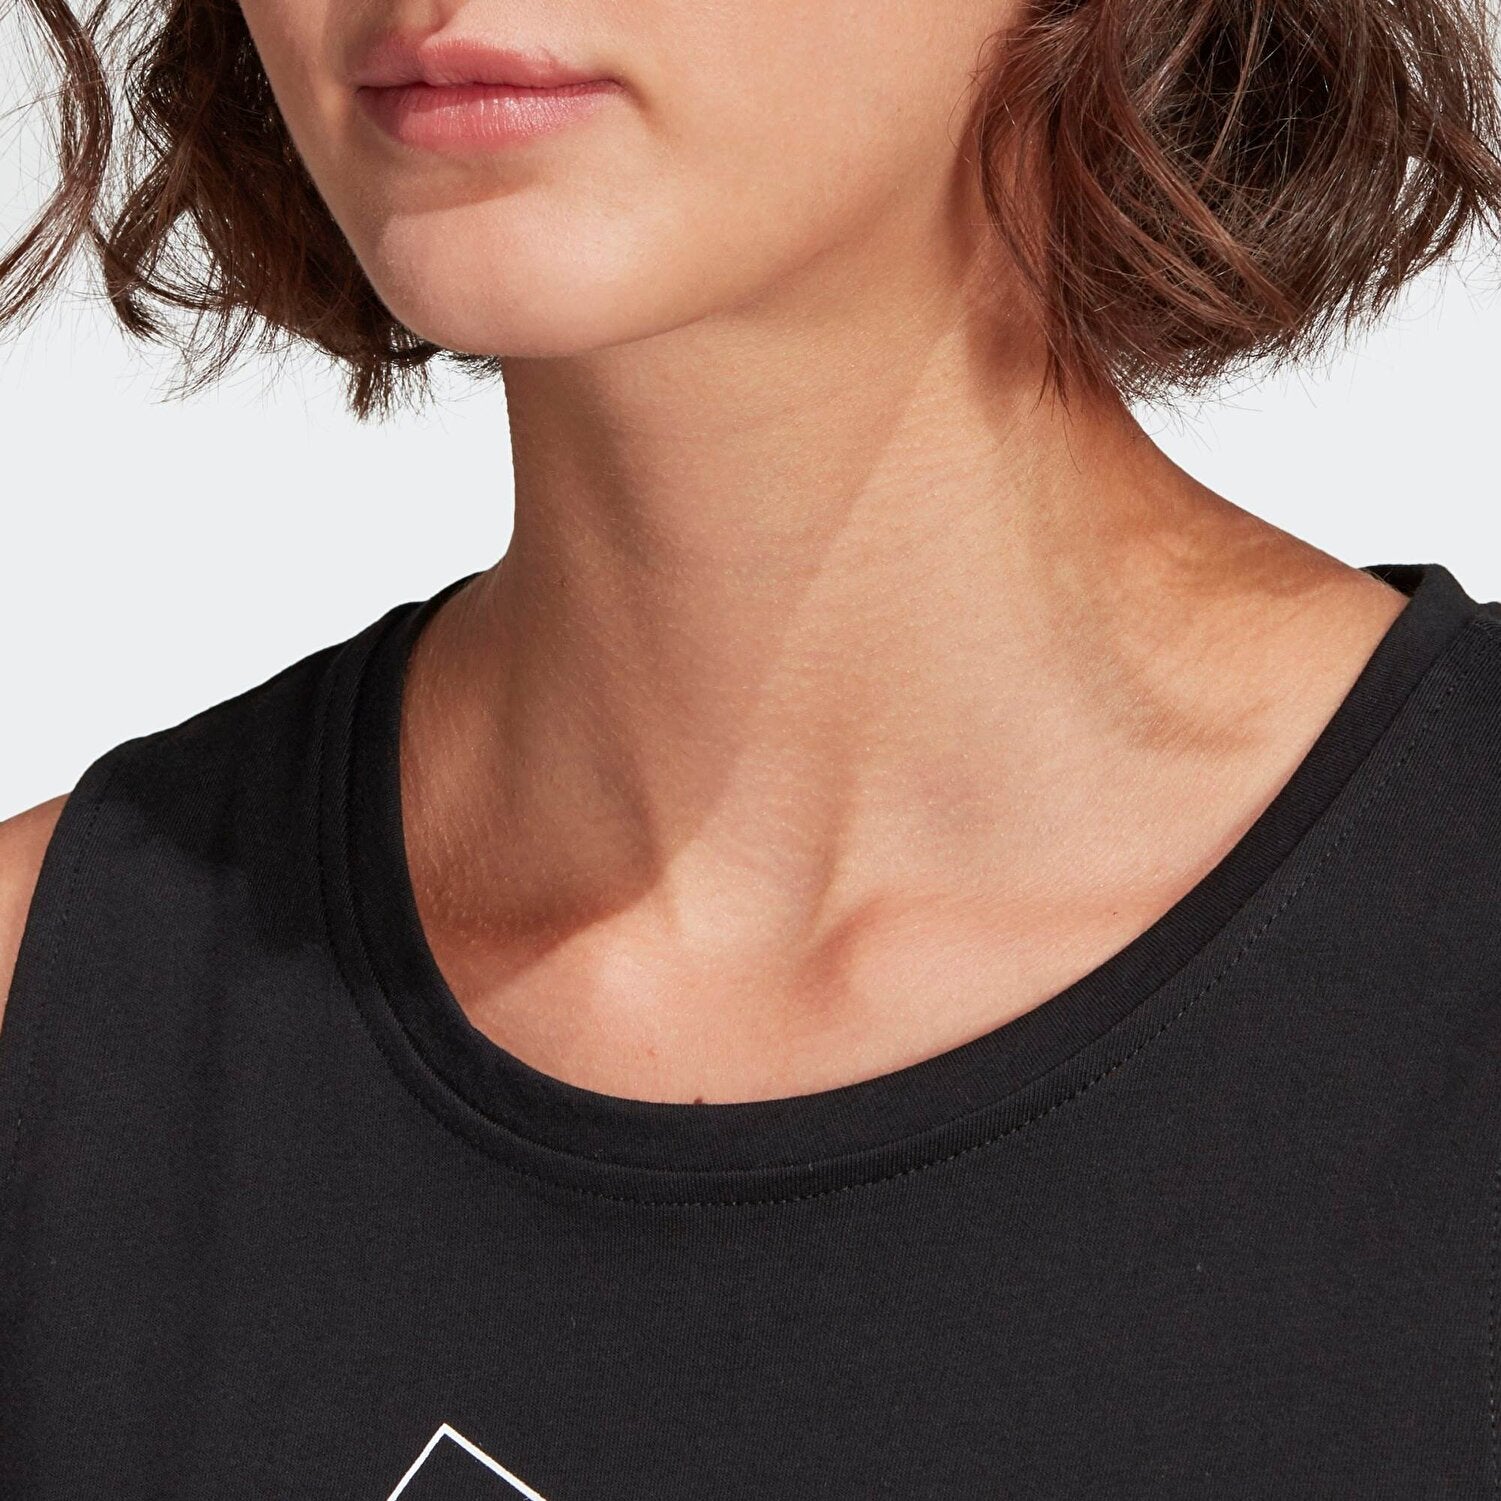 ADIDAS ESSENTIALS STACKED LOGO TANK TOP